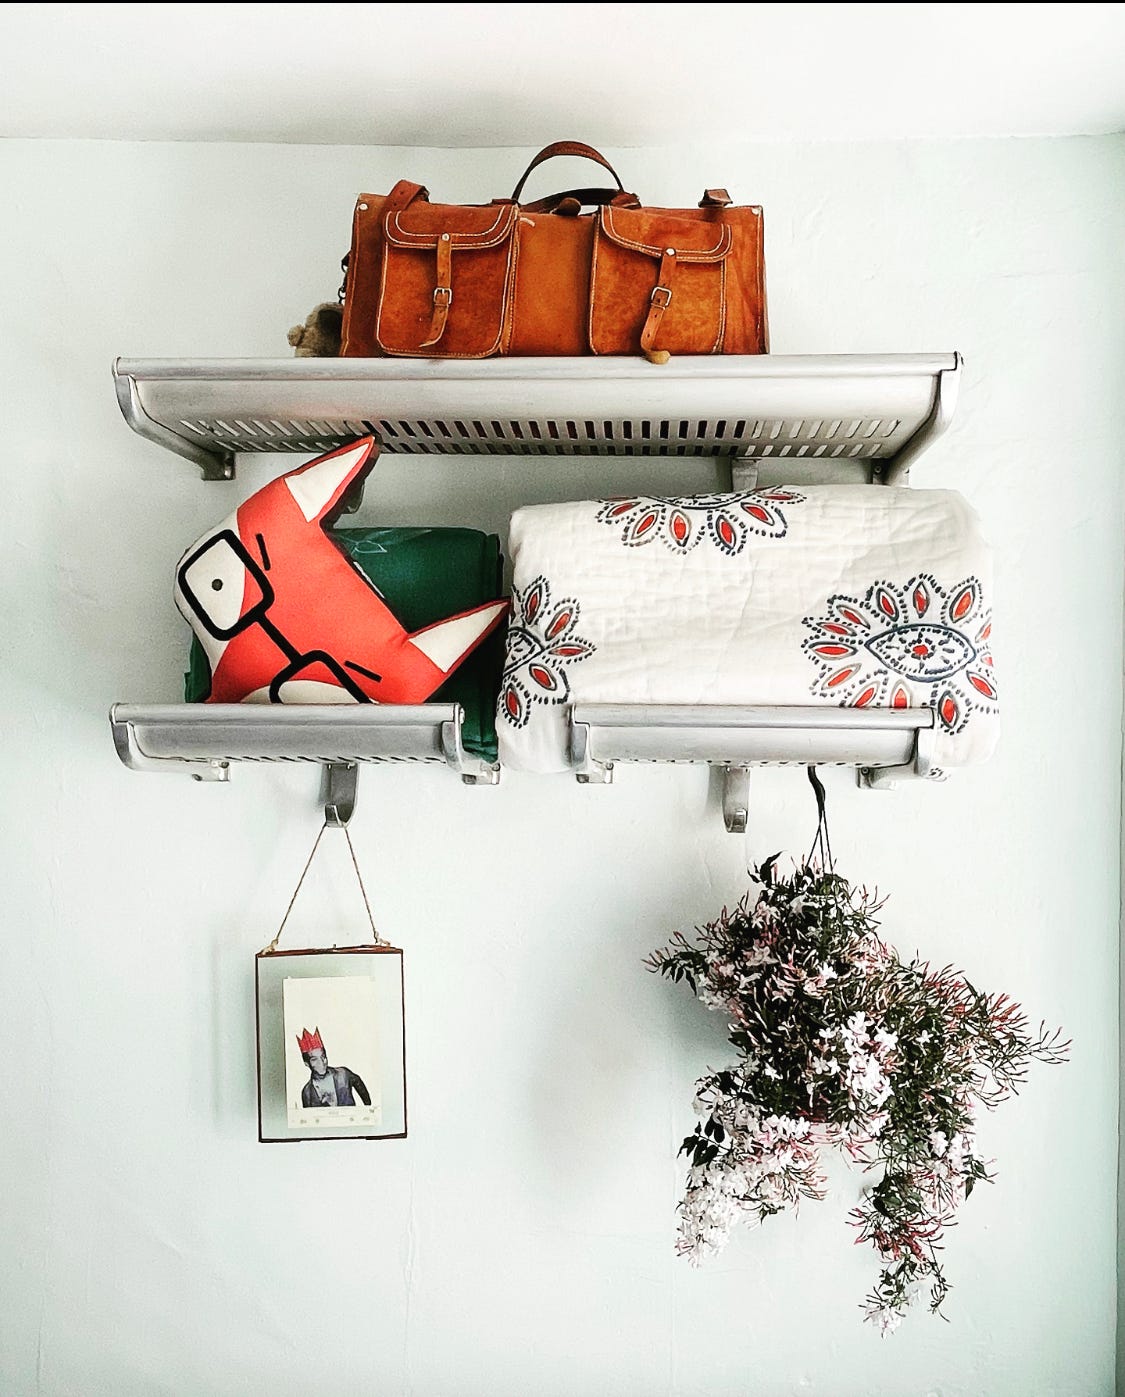 Photo of shelves with a bag, cushions and quilt and a jasmine plant hanging from them